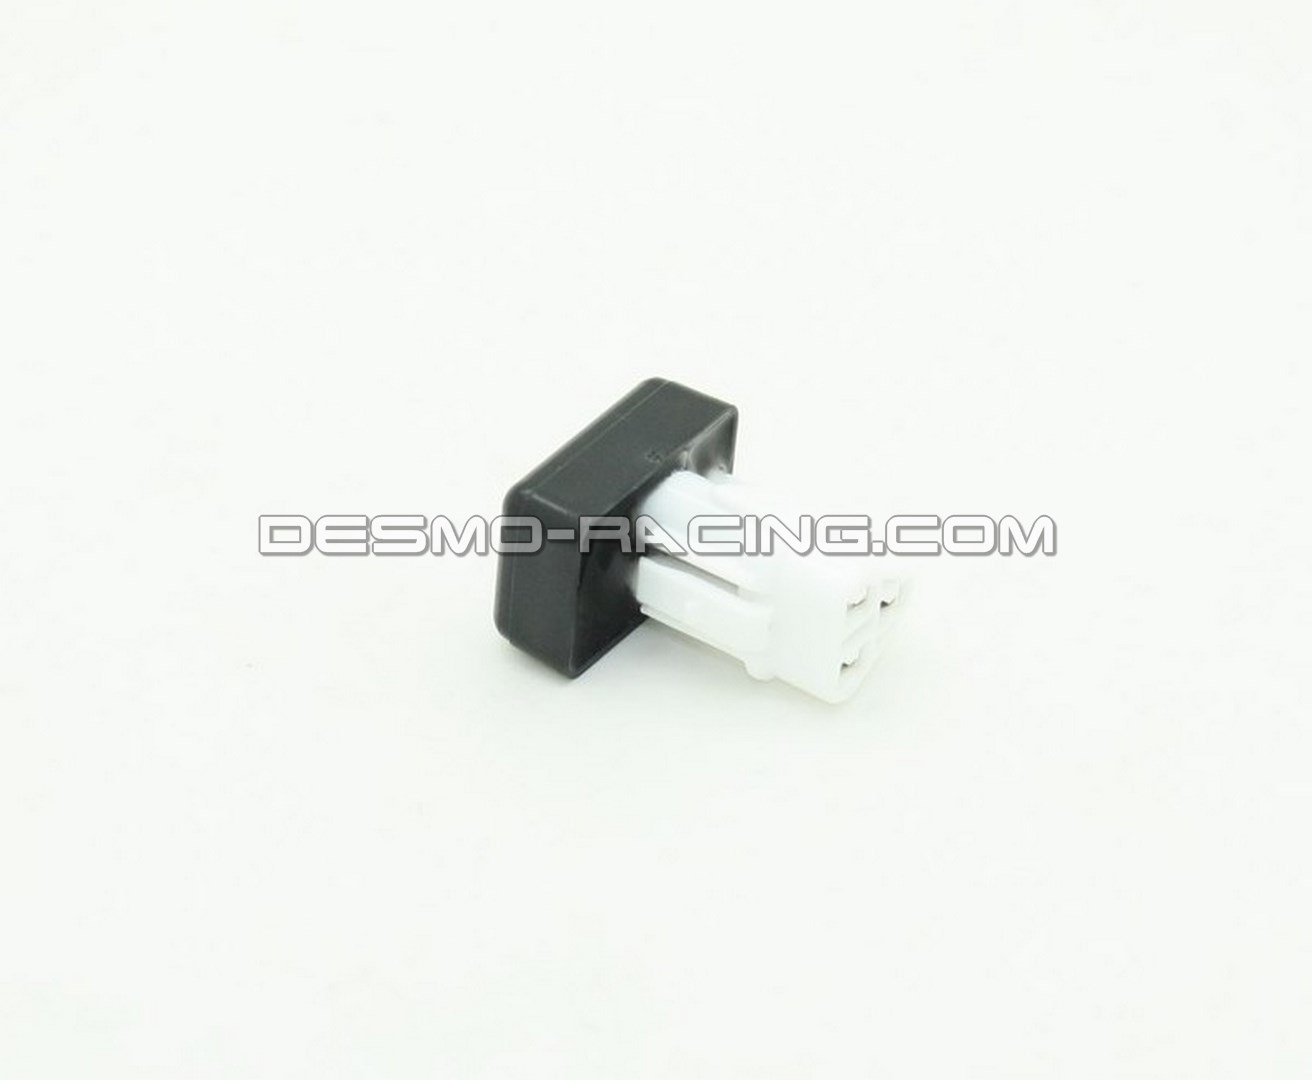 SIDE STAND ELIMINATOR BYPASS CONNECTOR DUCATI - SSB-004